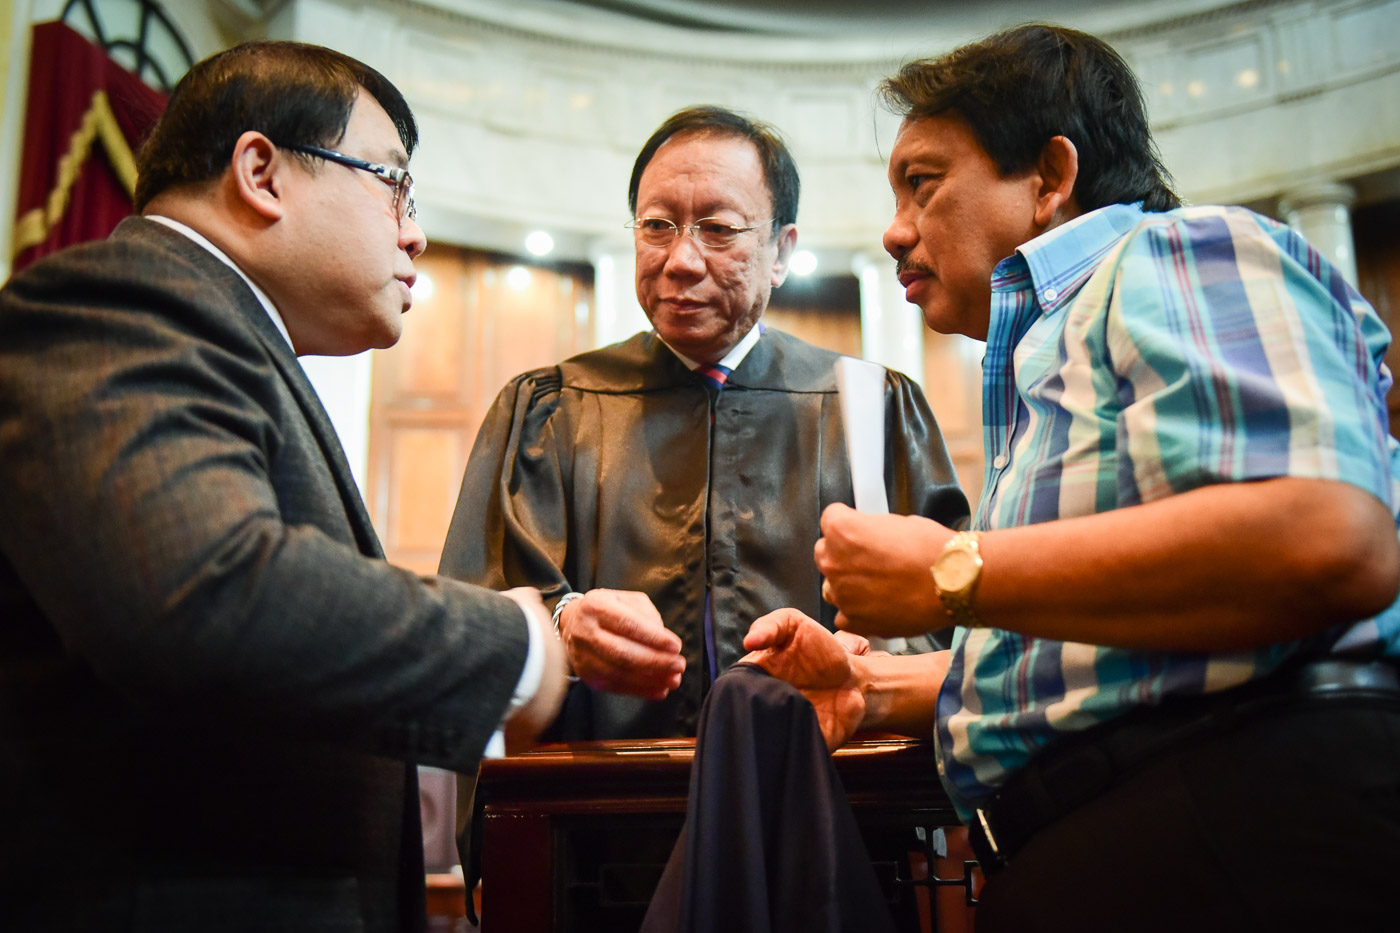 CALIDA AS SOLGEN. Solicitor General Jose Calida talks to VACC's Ferdinand Topacio (left) and Dante Jimenez (right) during the Supreme Court's oral arguments. File photo by LeAnne Jazul/Rappler 